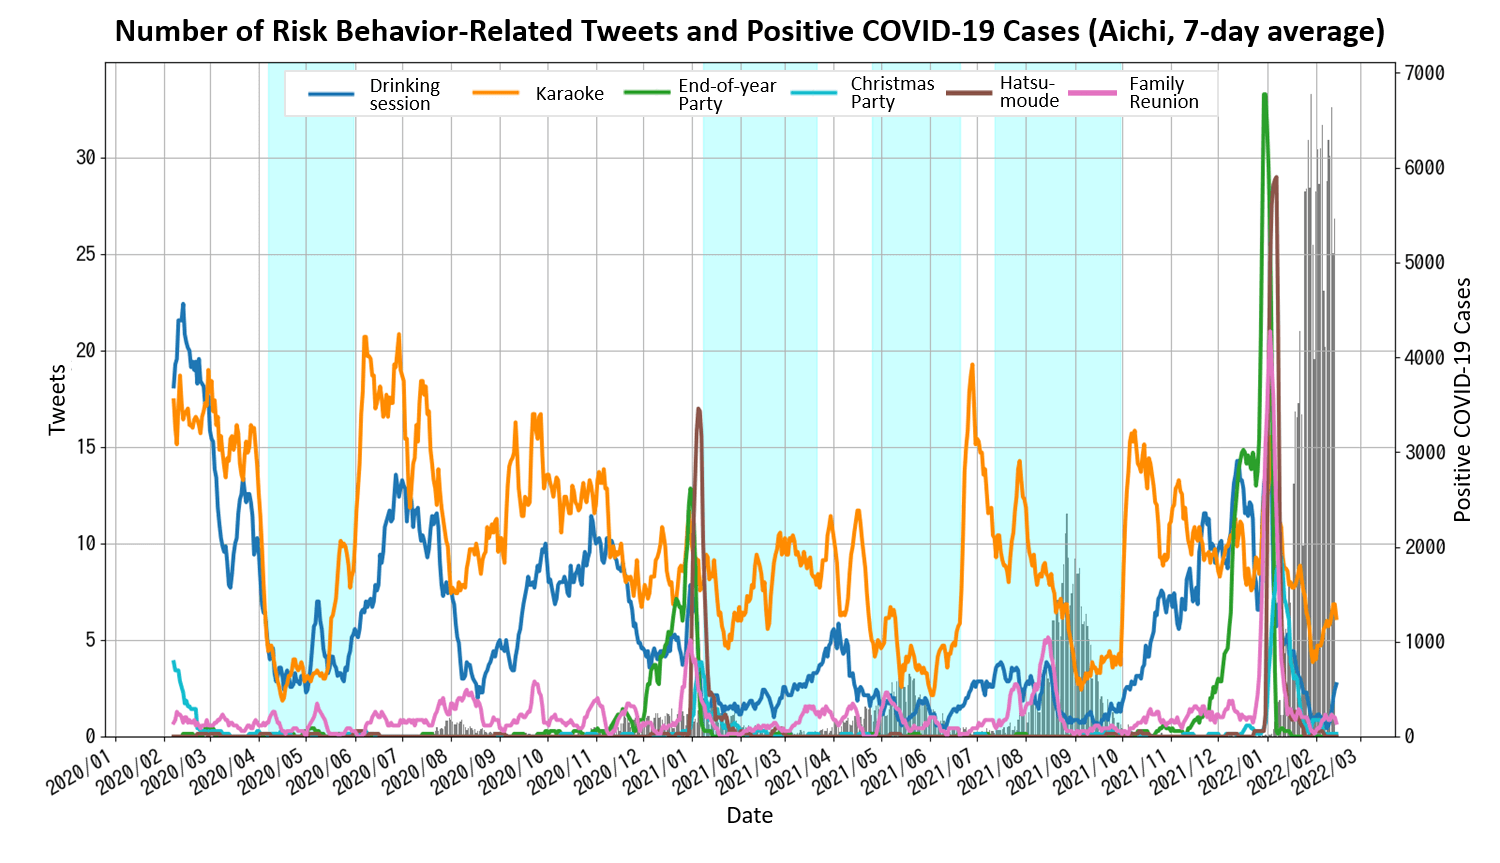 Number of Risk Behavior-Related Tweets snd Positive COVID-19 Cases